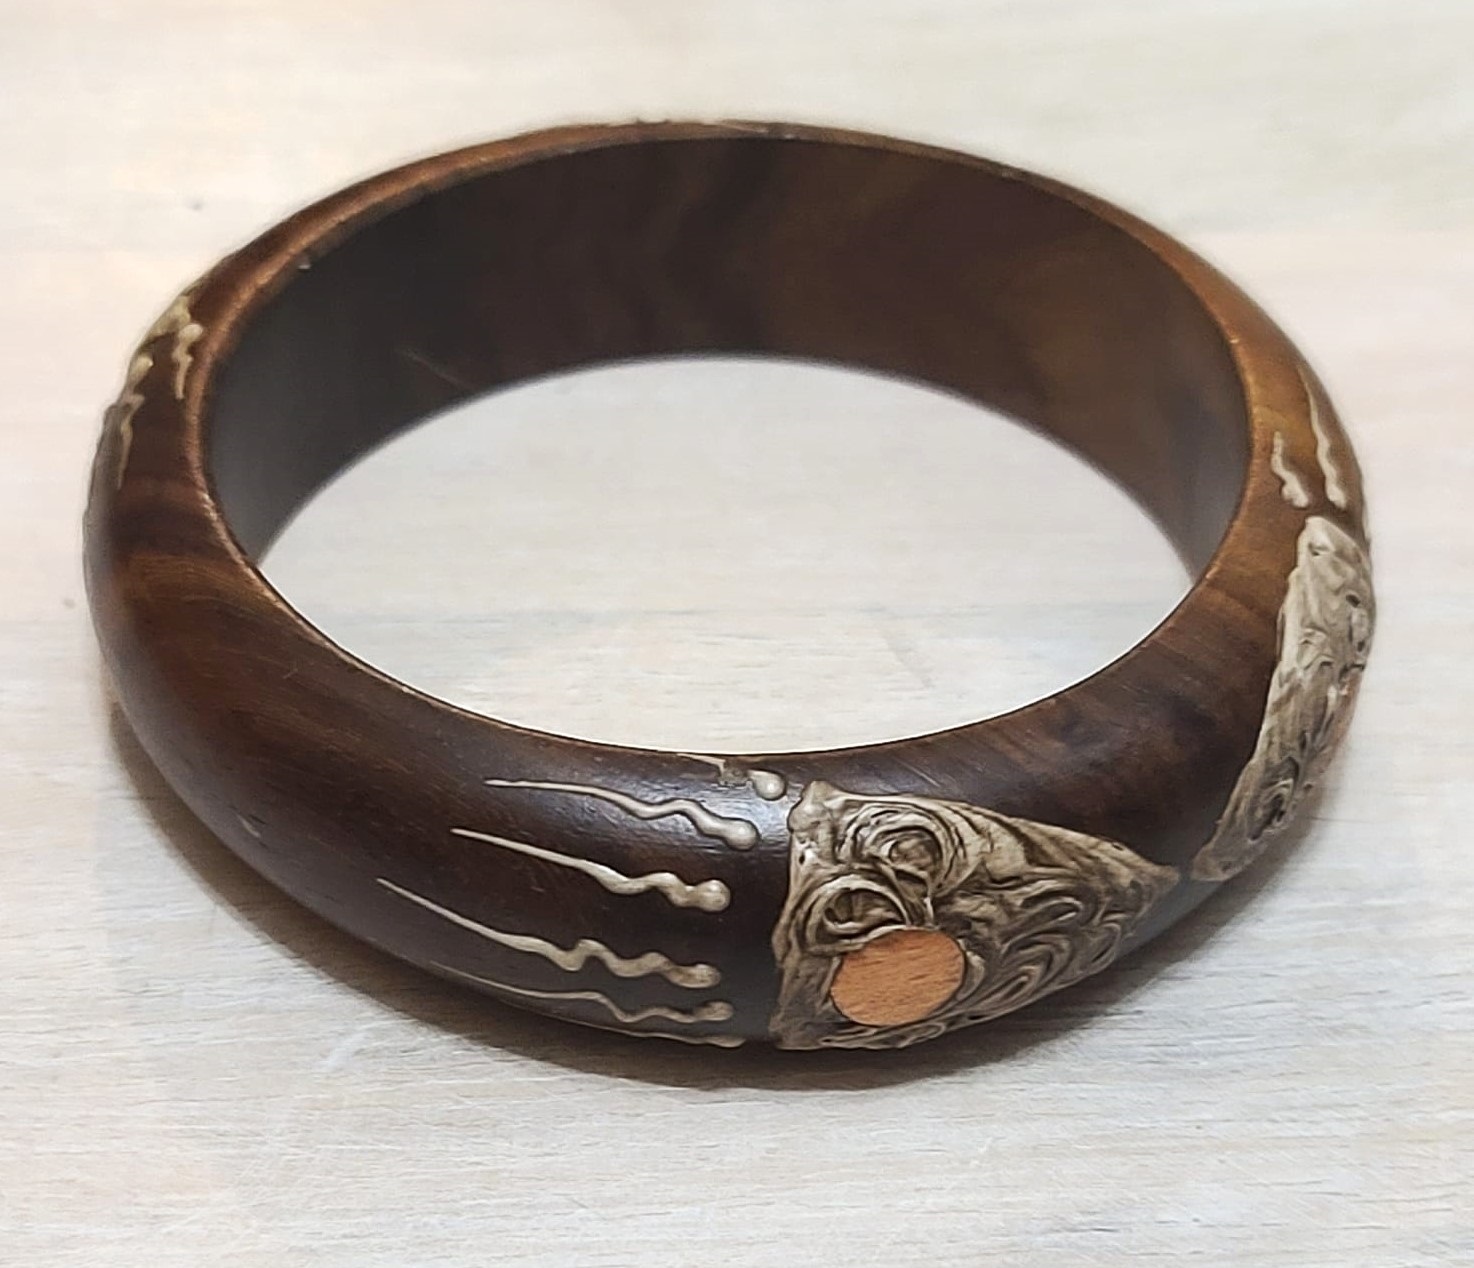 Wood bangle bracelet with copper accents